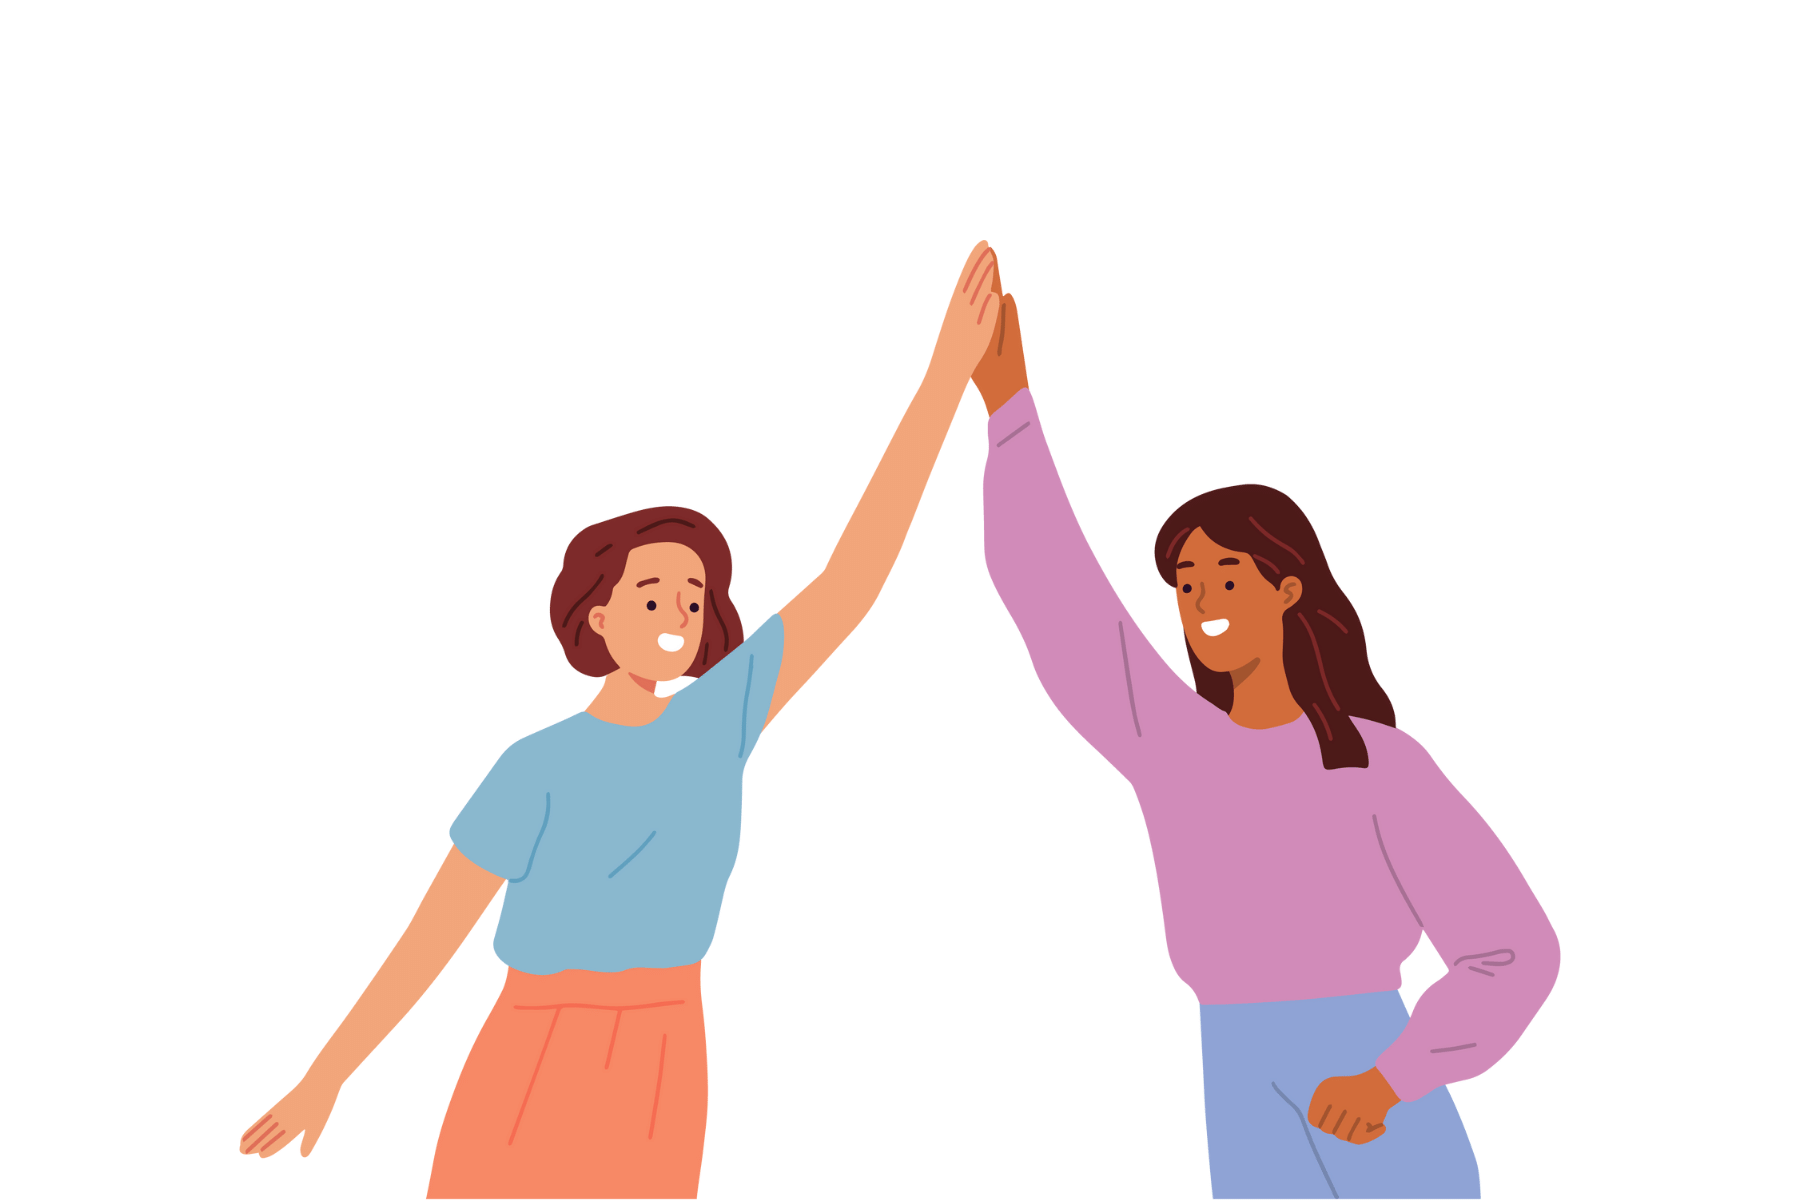 drawing of two young kids high-fiving each other.